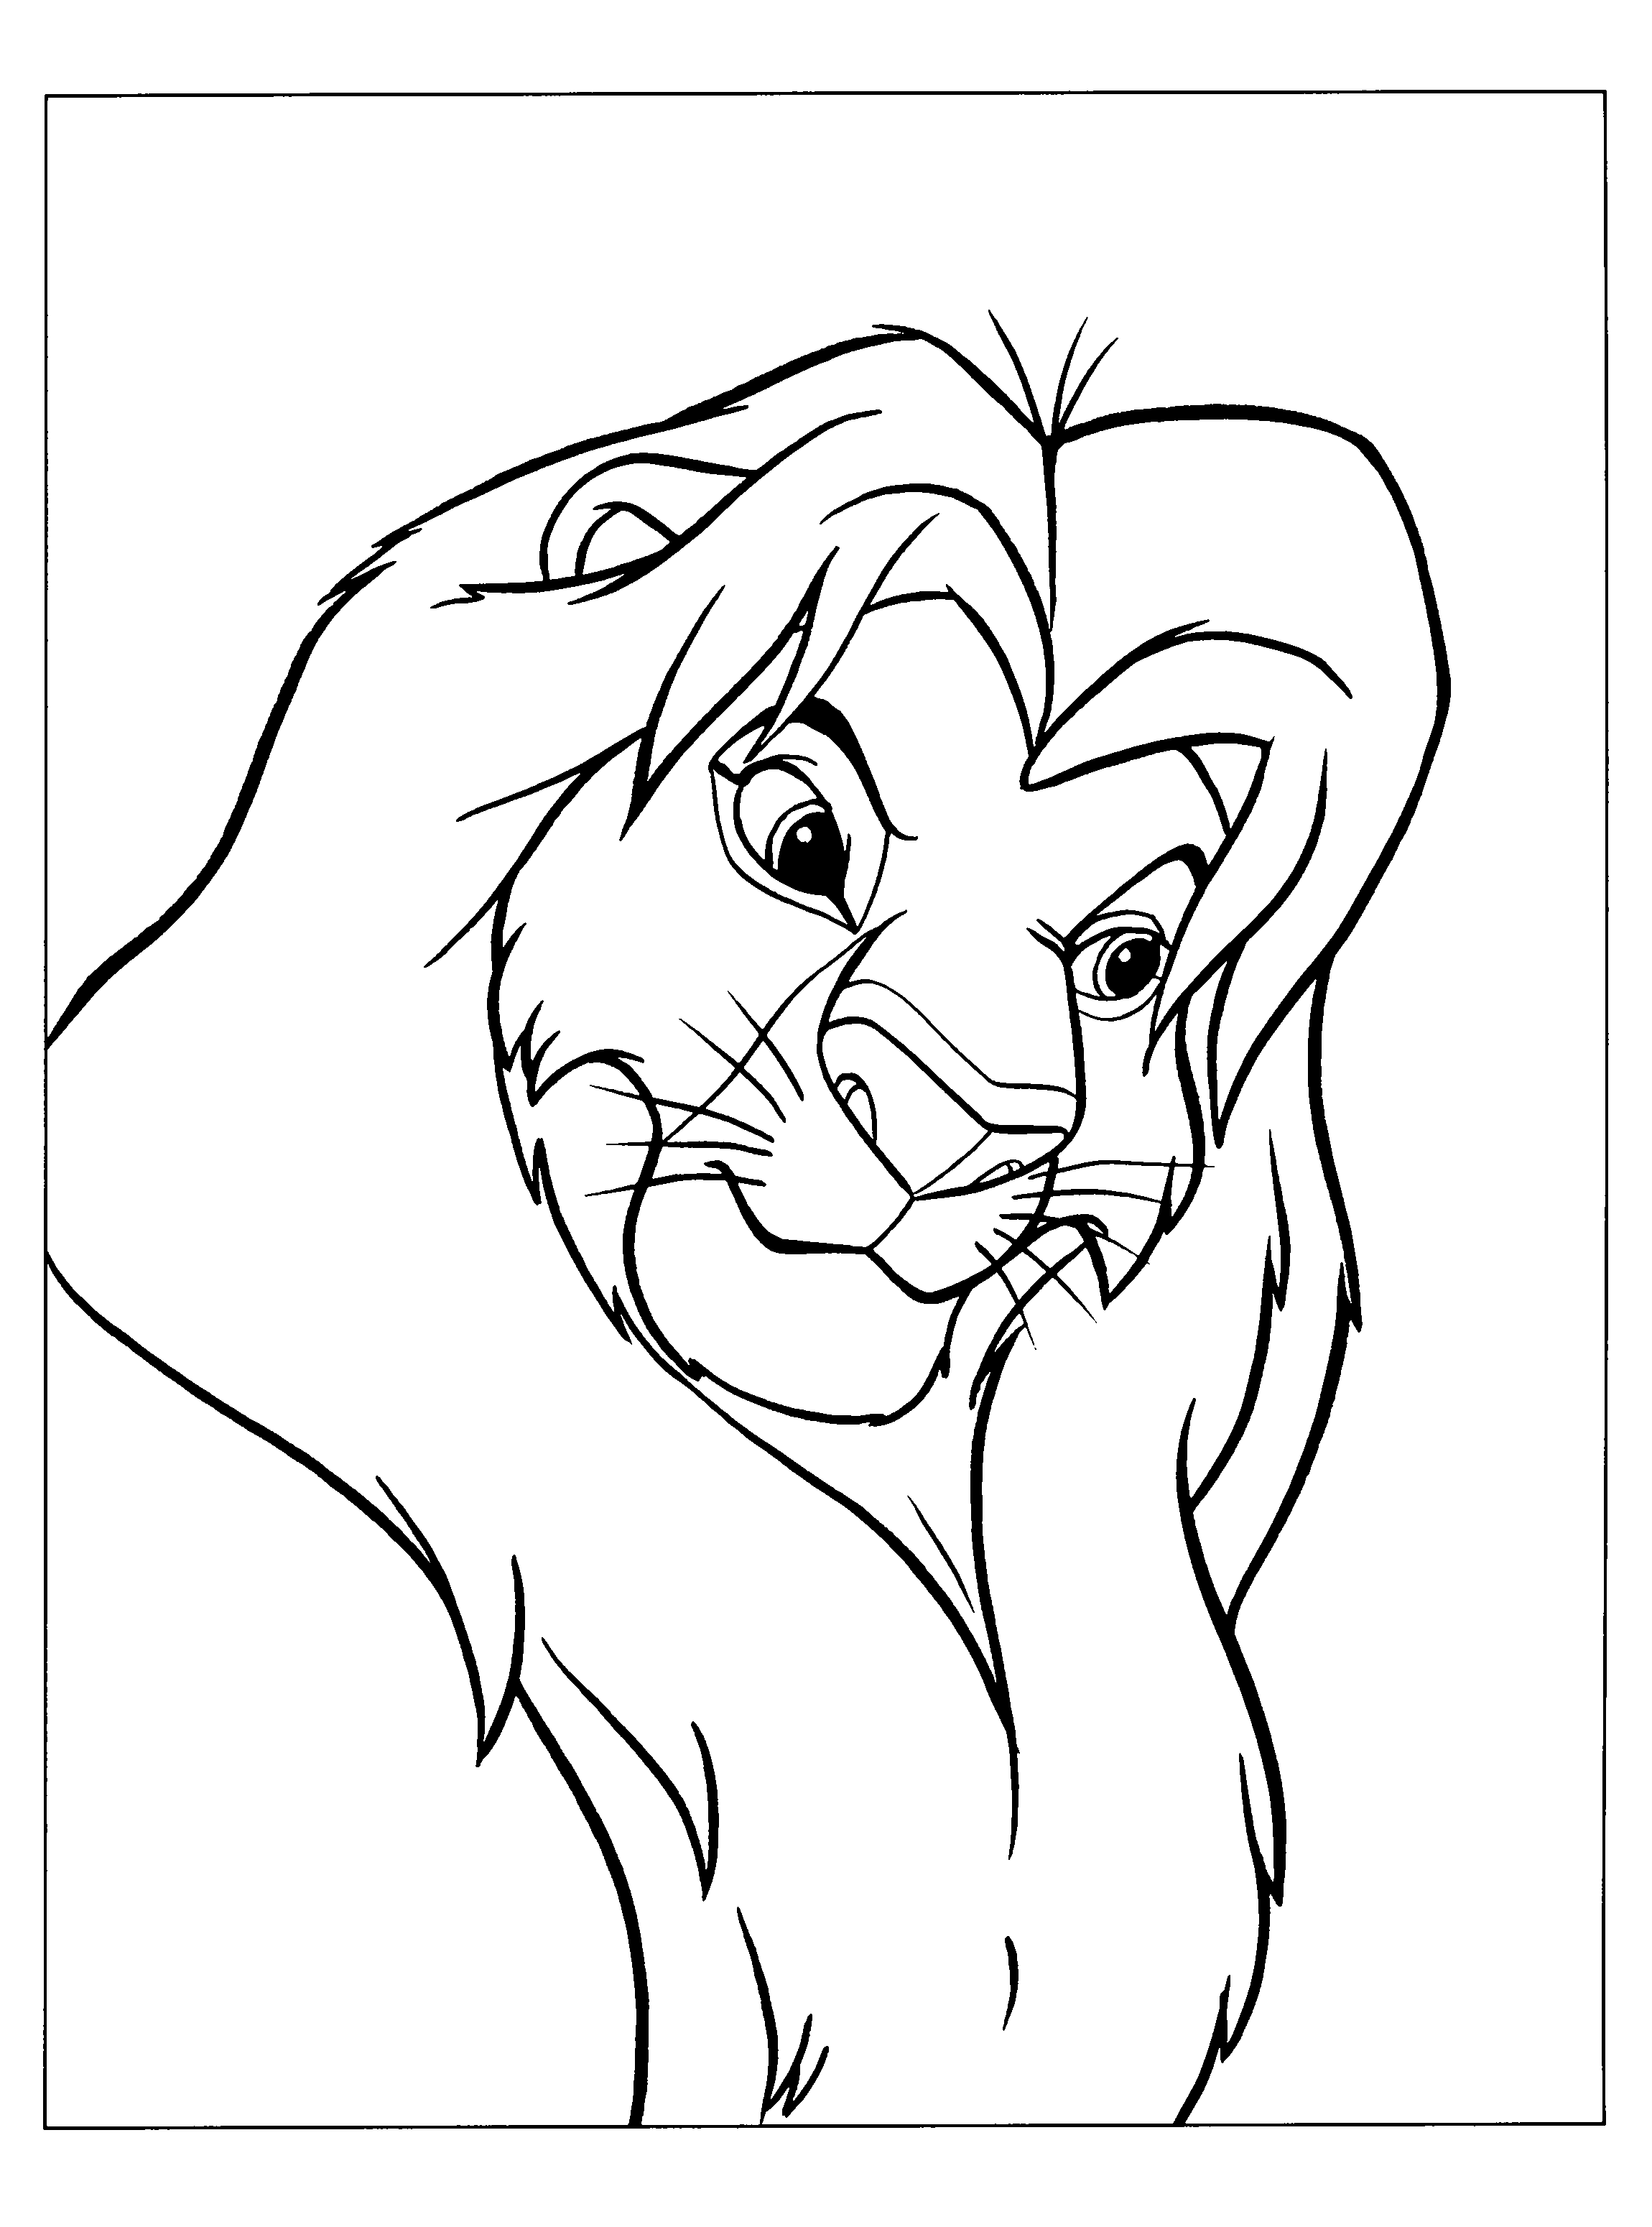 simba coloring page 24 best images about lion king coloring pages on pinterest simba coloring page 